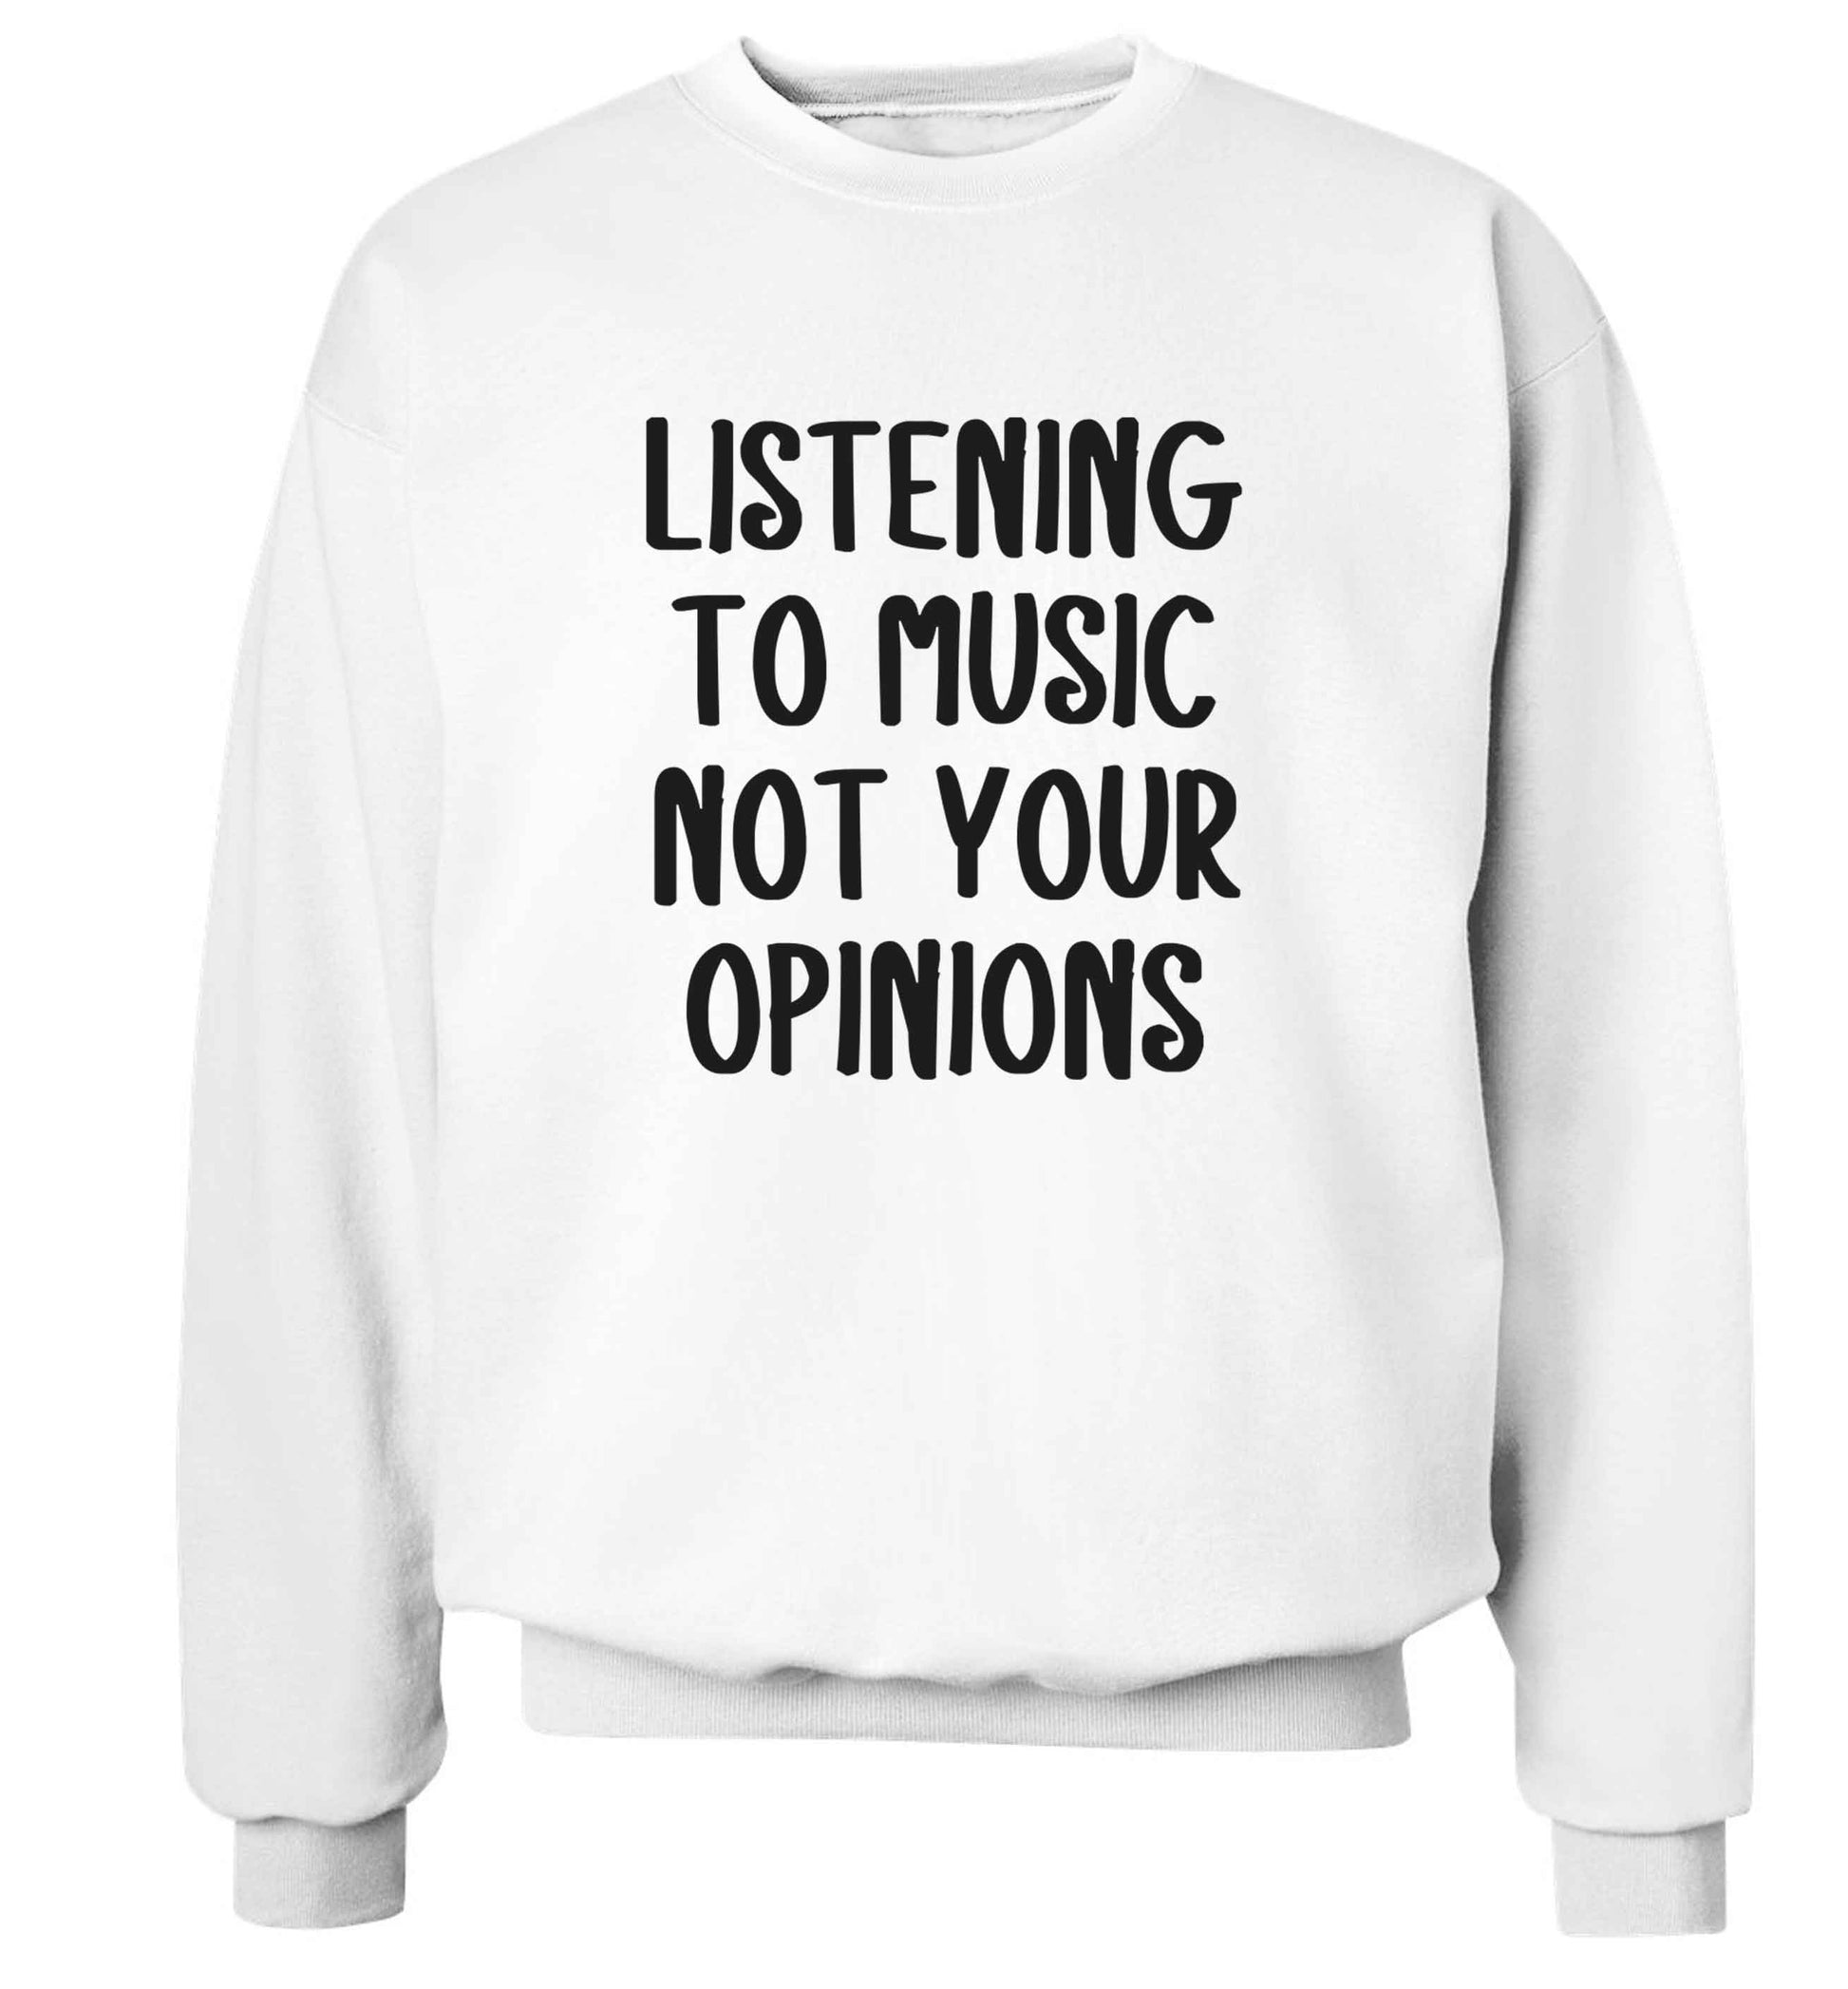 Listening to music not your opinions adult's unisex white sweater 2XL